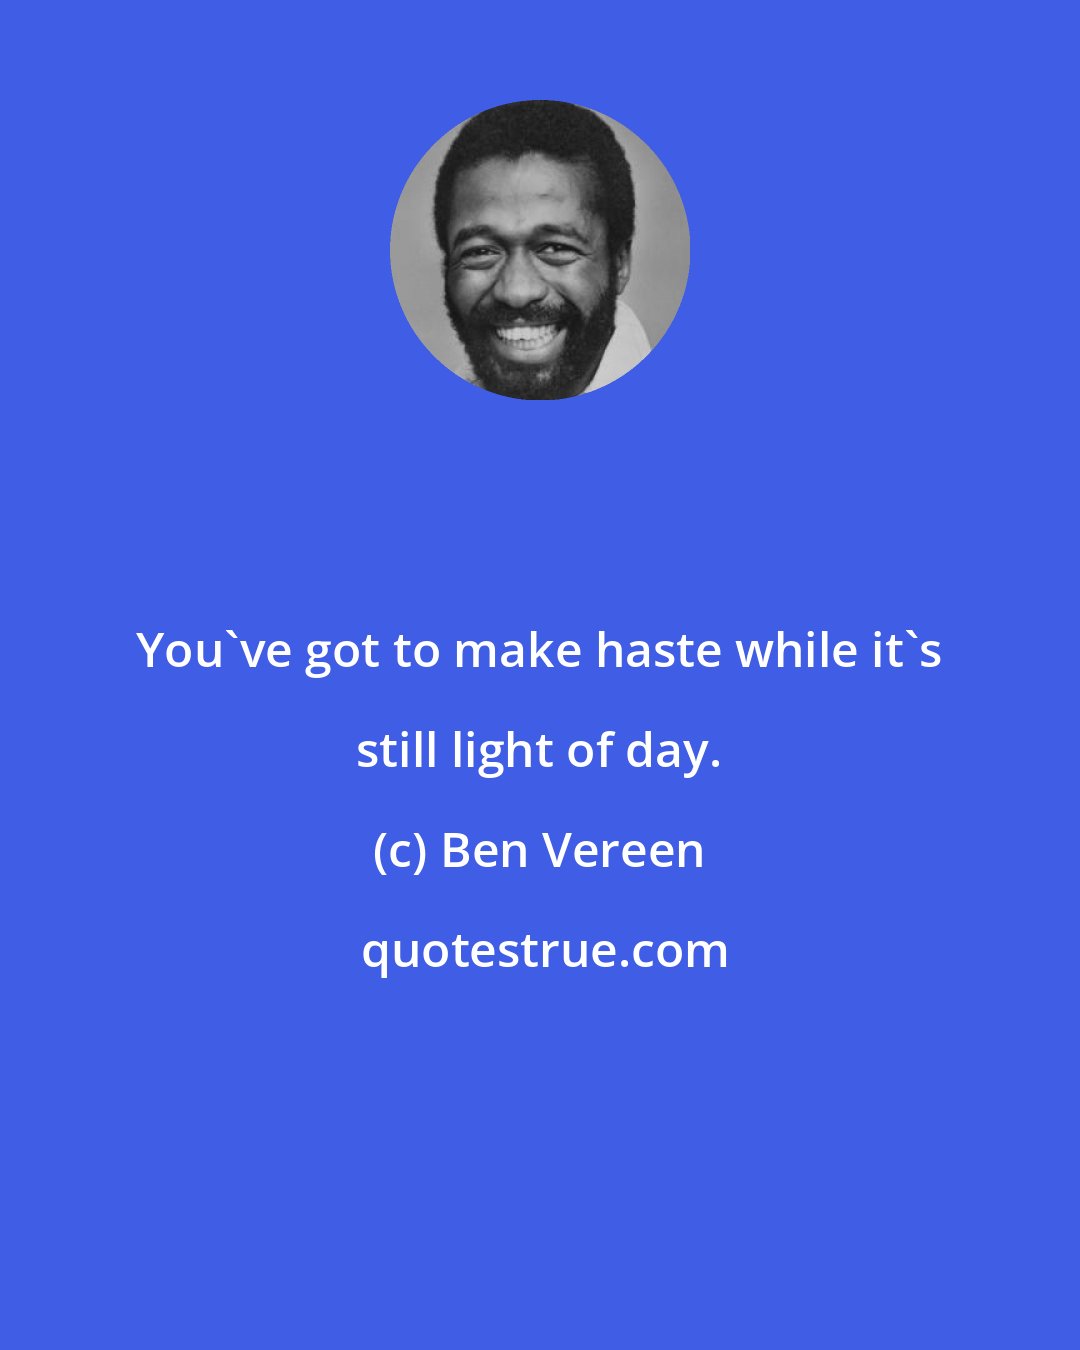 Ben Vereen: You've got to make haste while it's still light of day.